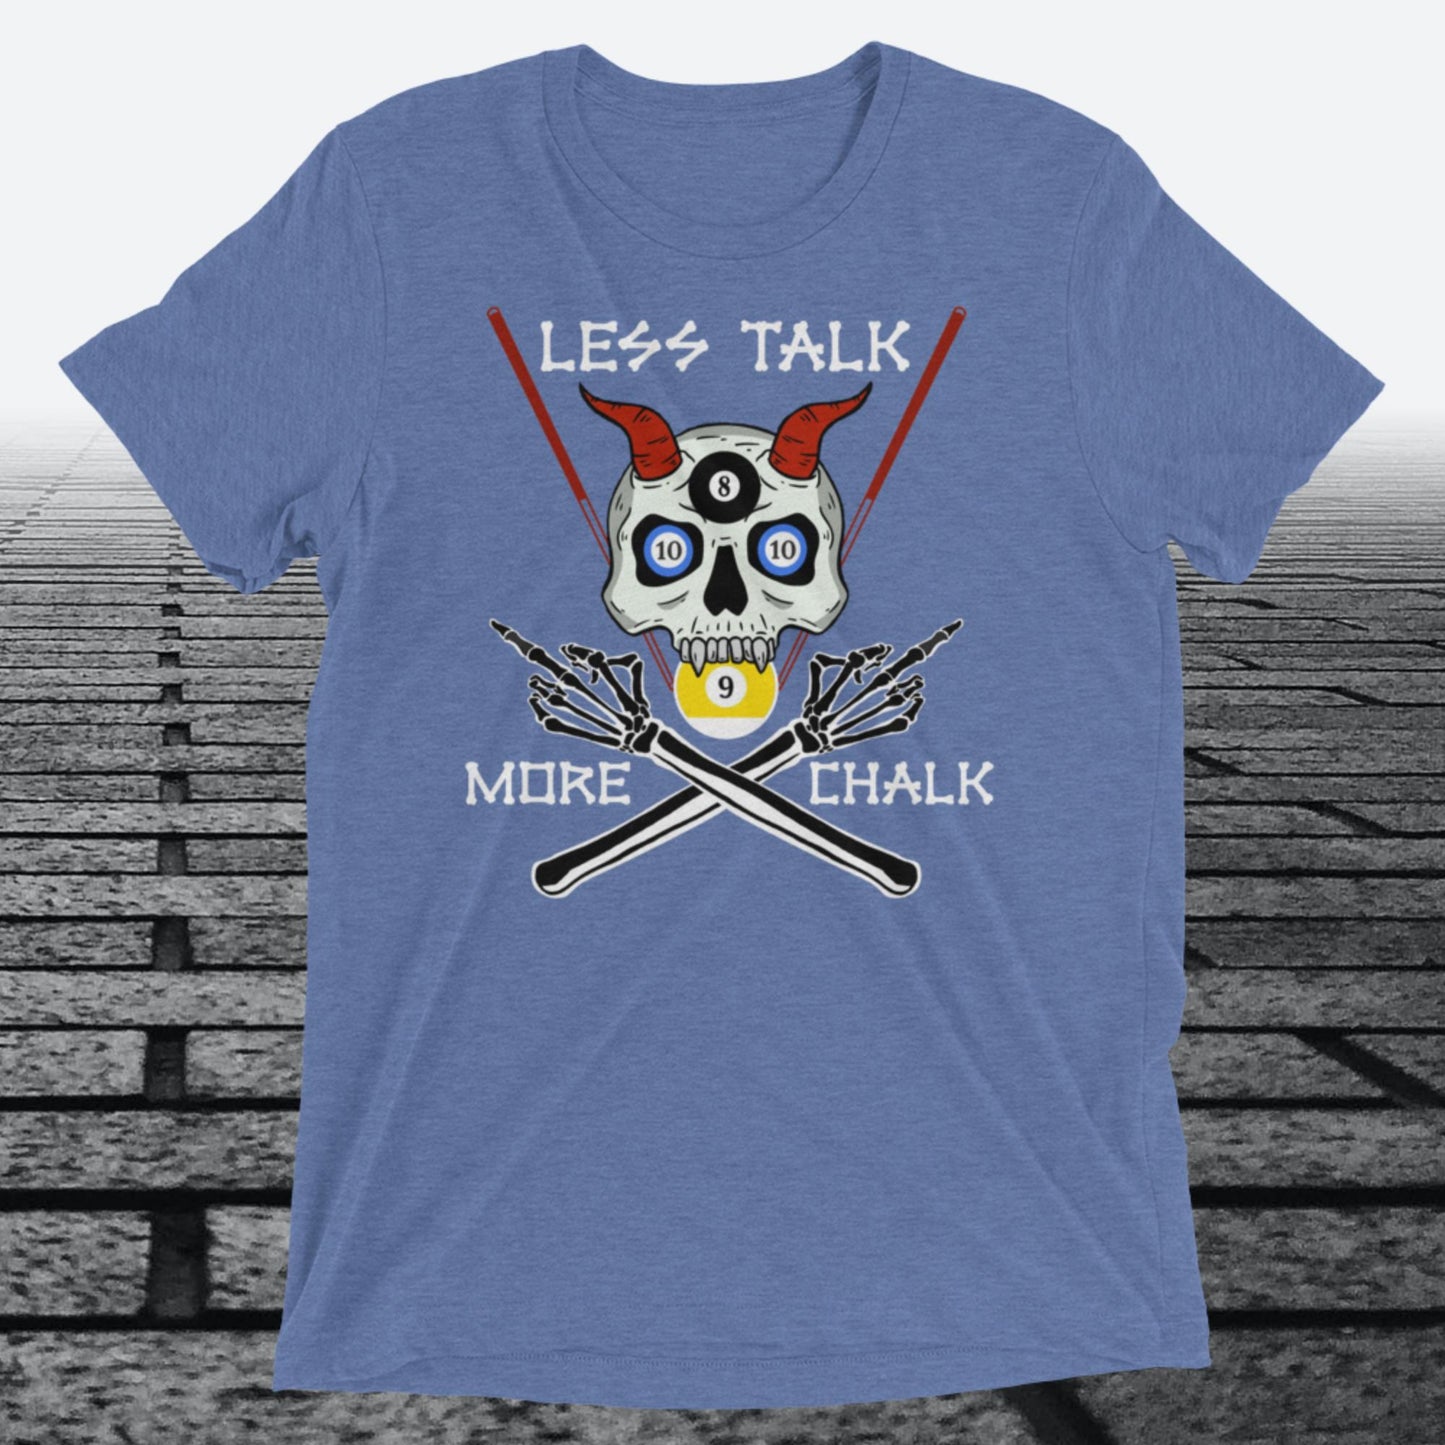 Less Talk More Chalk, on the front, Tri-blend t-shirt